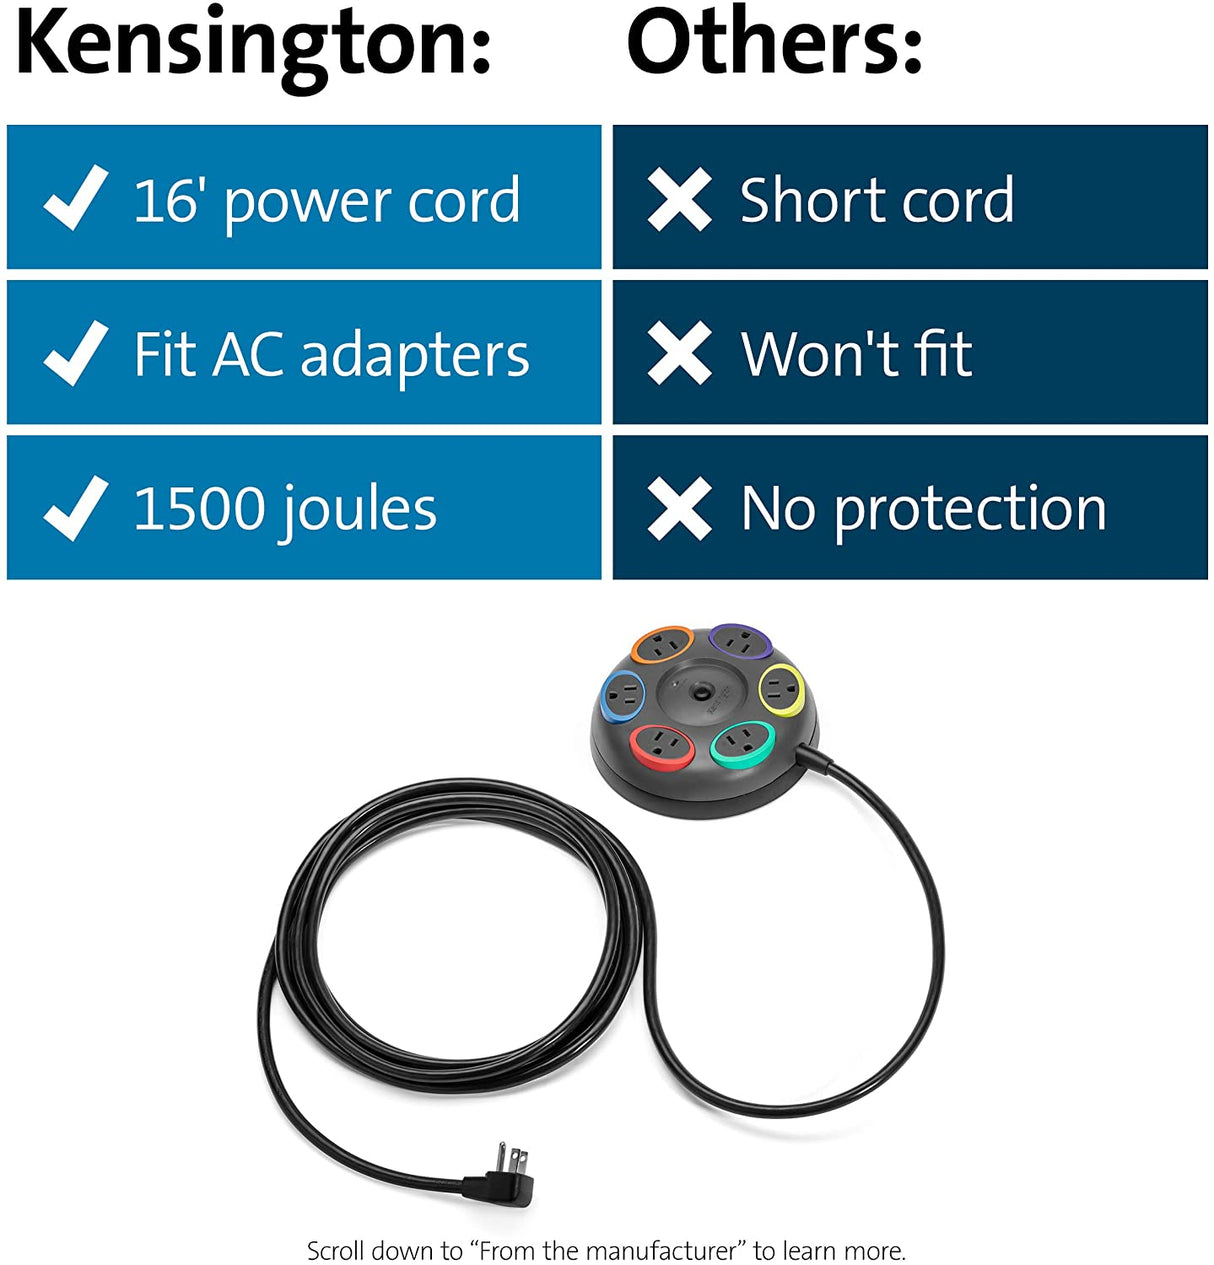 Kensington SmartSockets 6-Outlet, 16-Foot Cord, &amp; 1500 Joules Tabletop Surge Protector (K62634NA) 16-Foot Cord Tabletop (1500 Joules, 16' Cord)